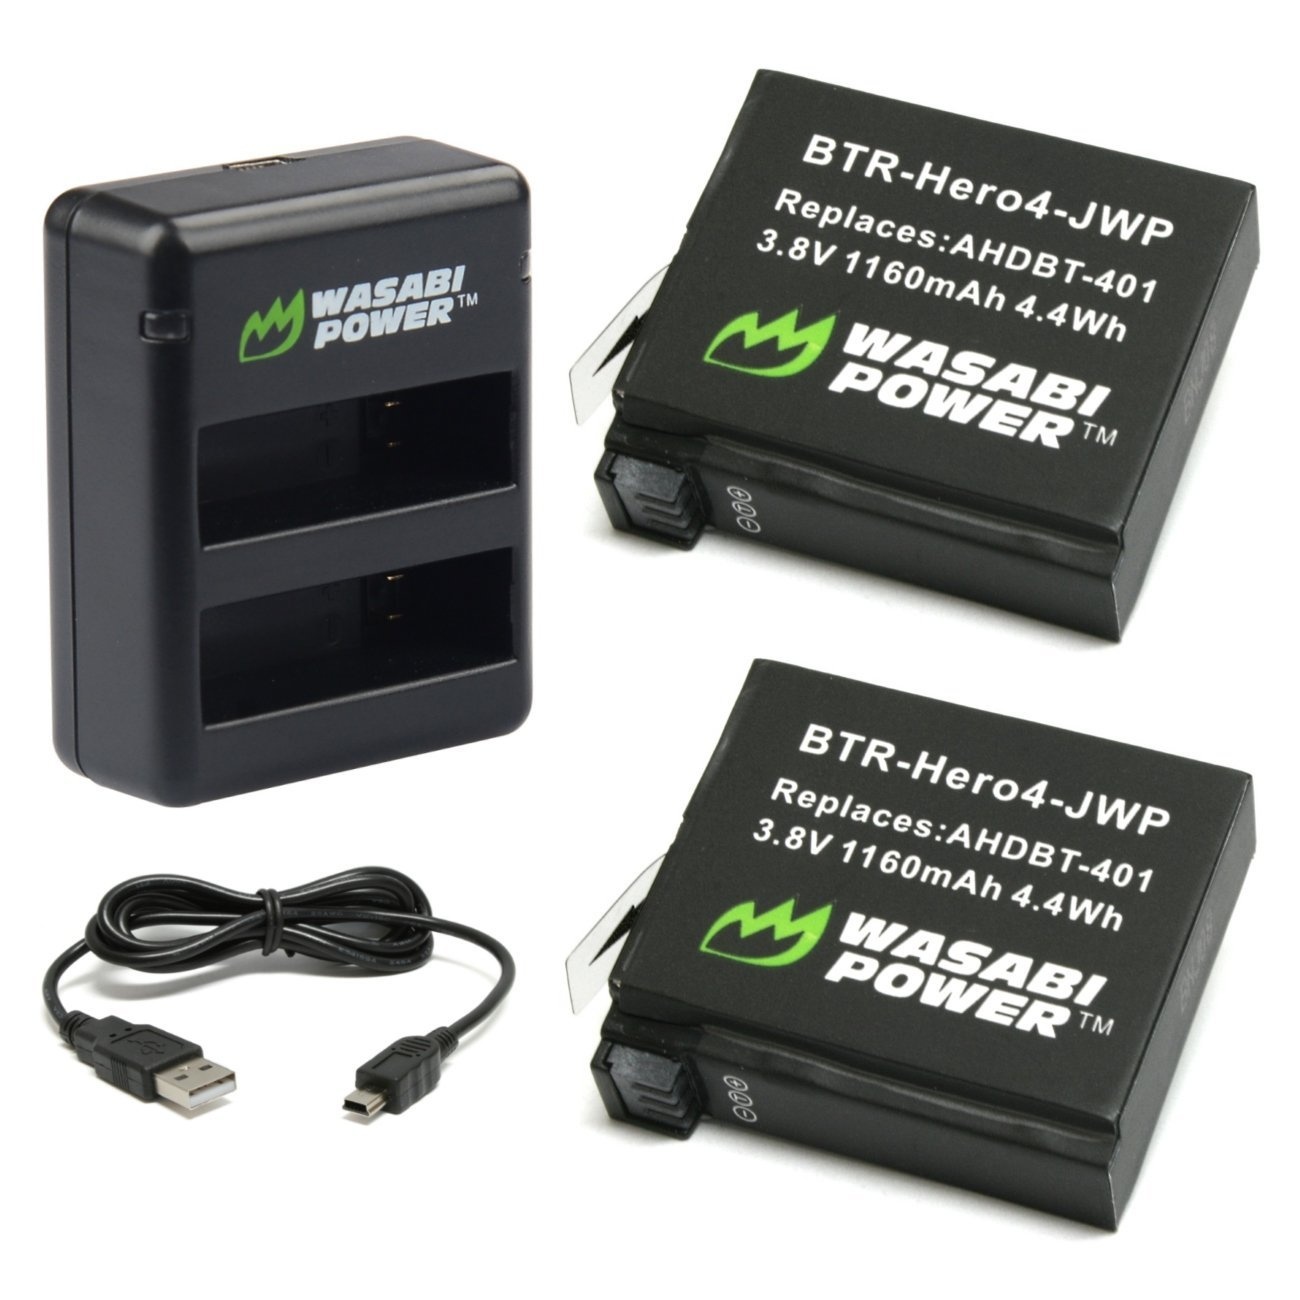 Wasabi Power Battery (2-Pack) and Dual Charger for GoPro HERO4